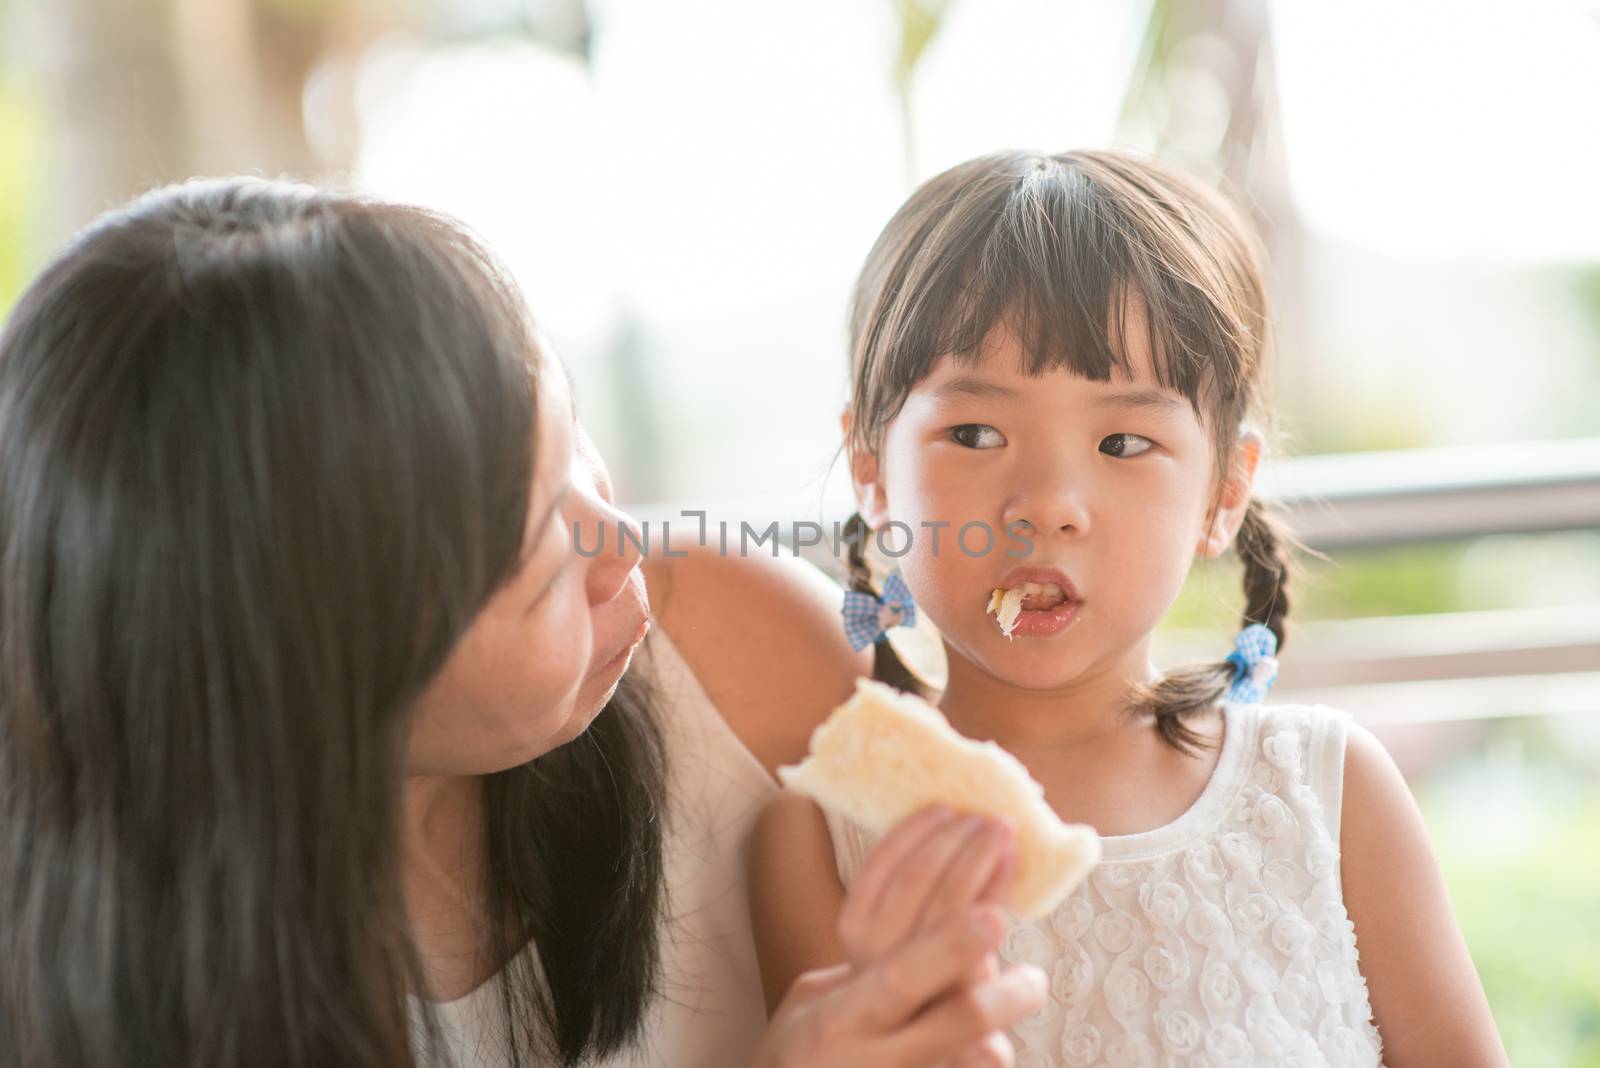 Asian child eating and sharing butter toast with mom at cafe. Outdoor family lifestyle with natural light.